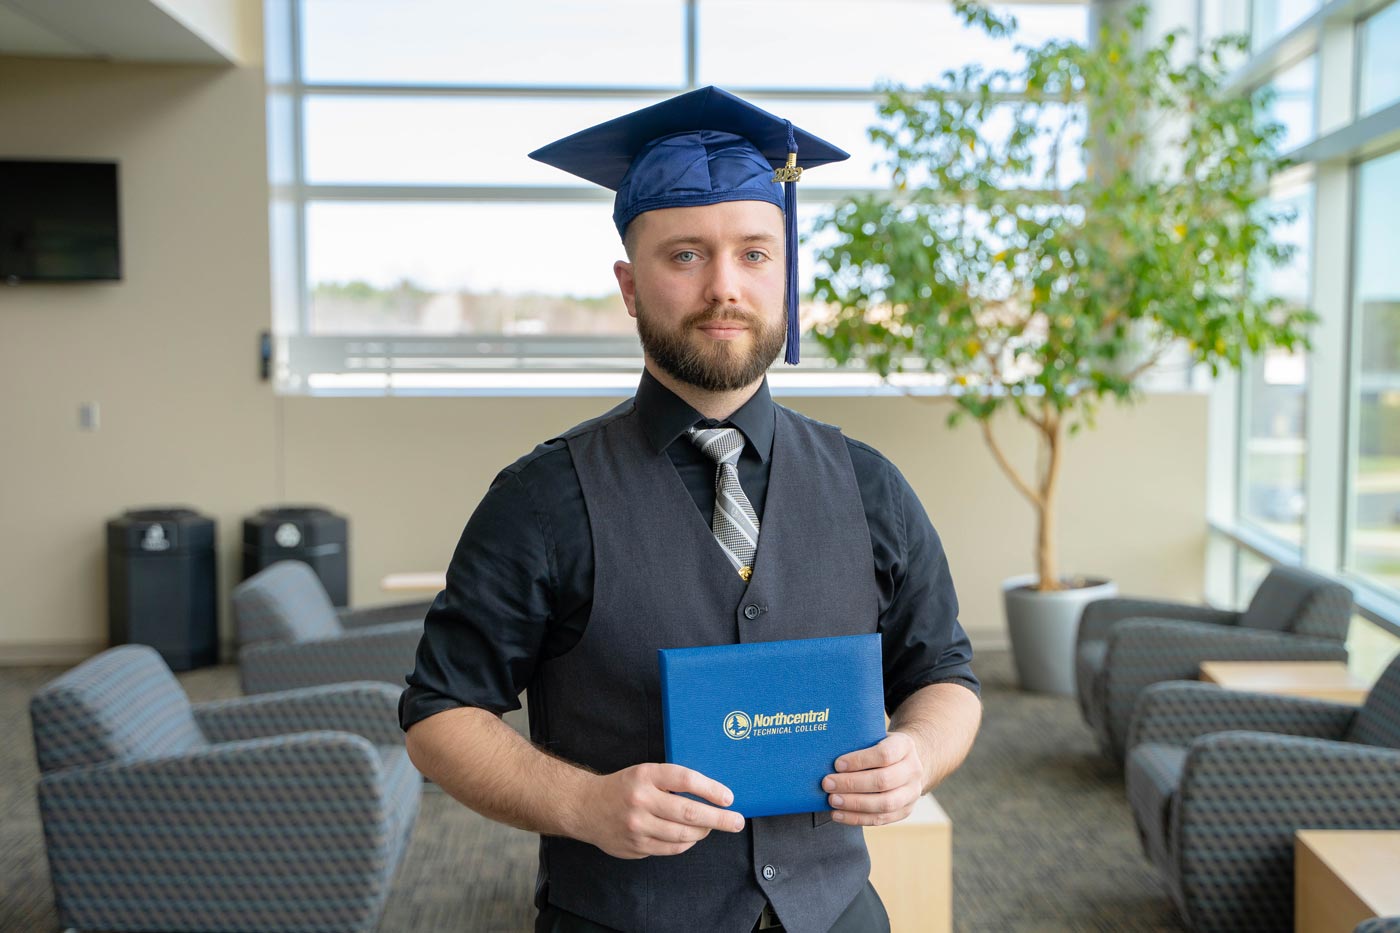 William posing while wearing an NTC graduation cap and holding his diploma.